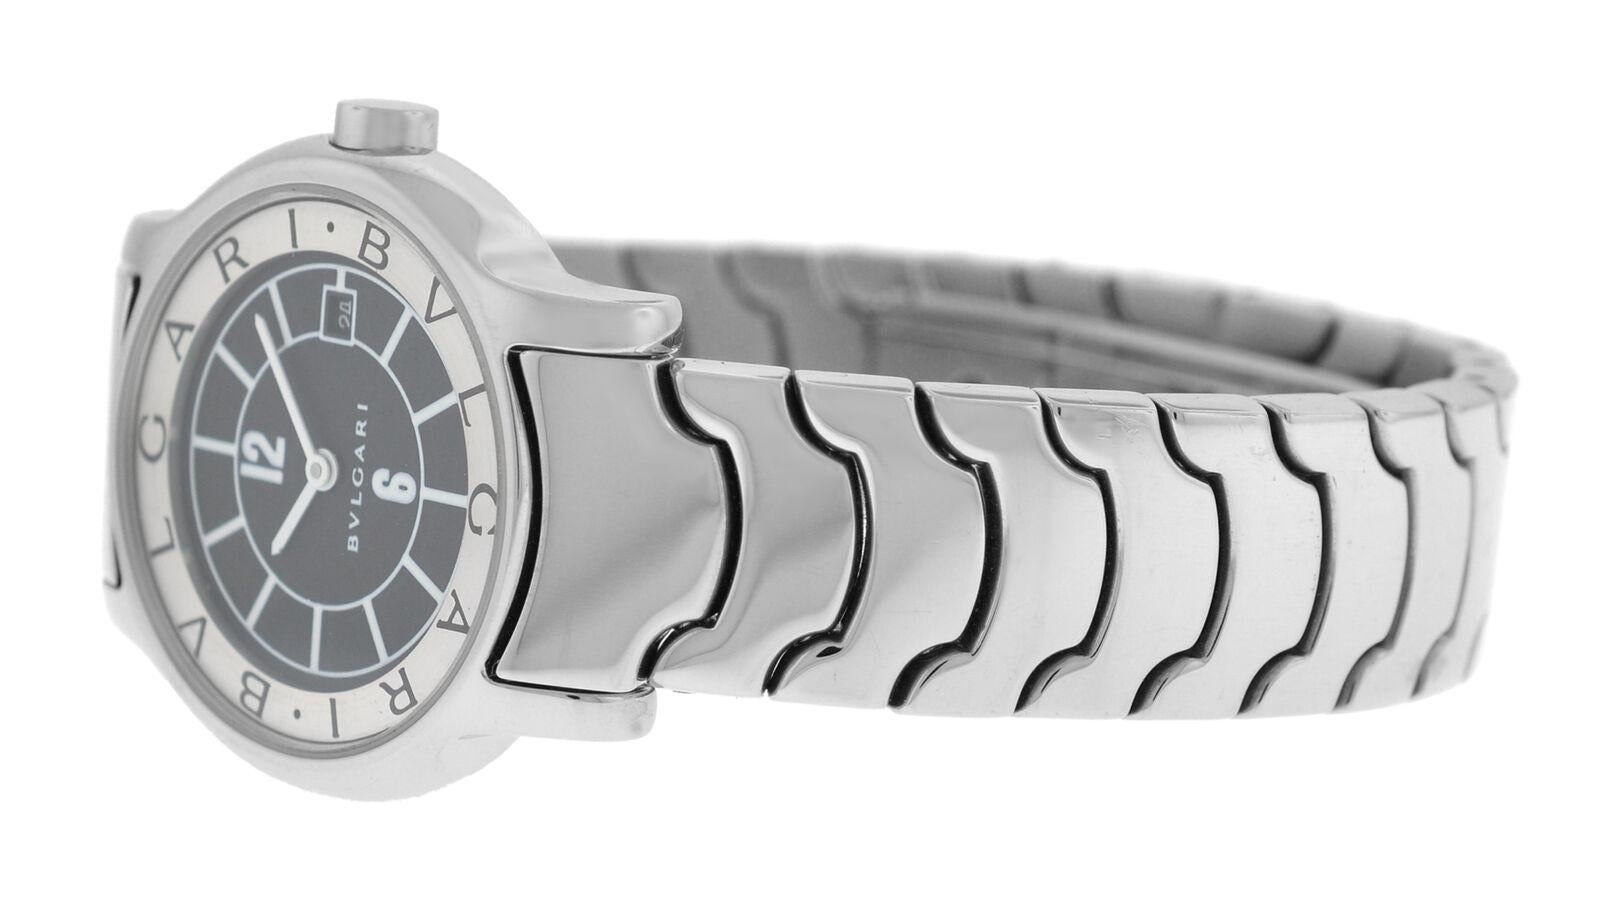 Ladies Bvlgari Solotempo ST29S Stainless Steel Date Quartz Watch For Sale 2